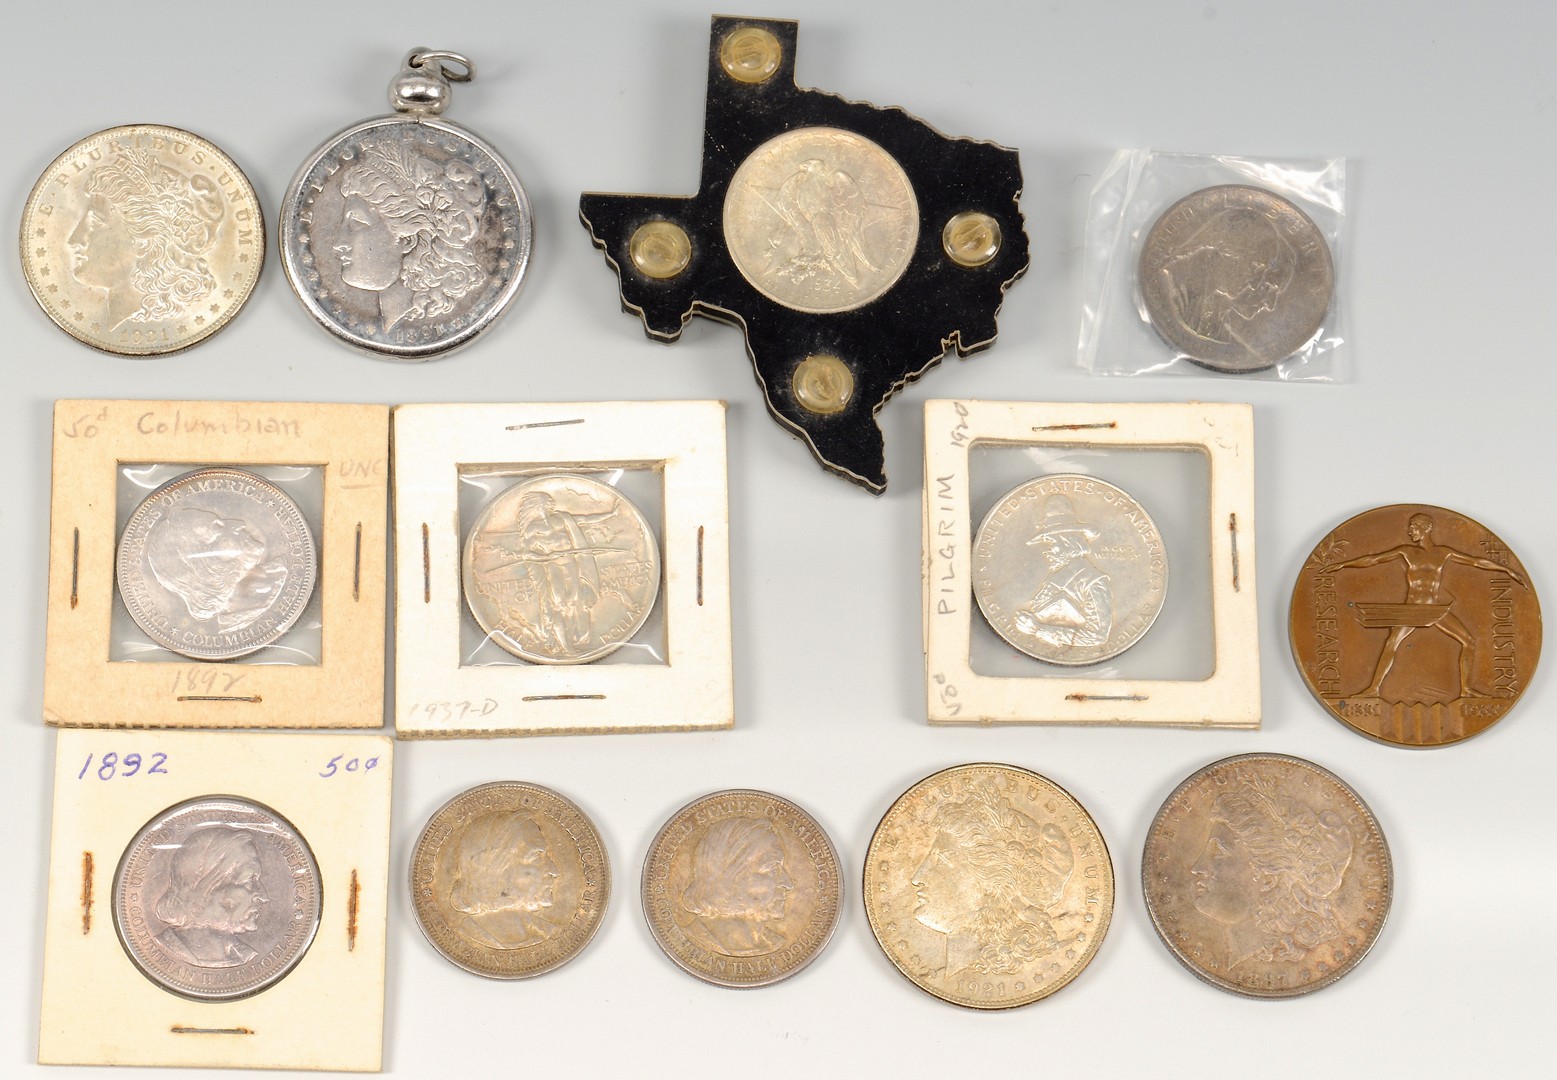 Lot 900: Group of 13 Commemorative Coins